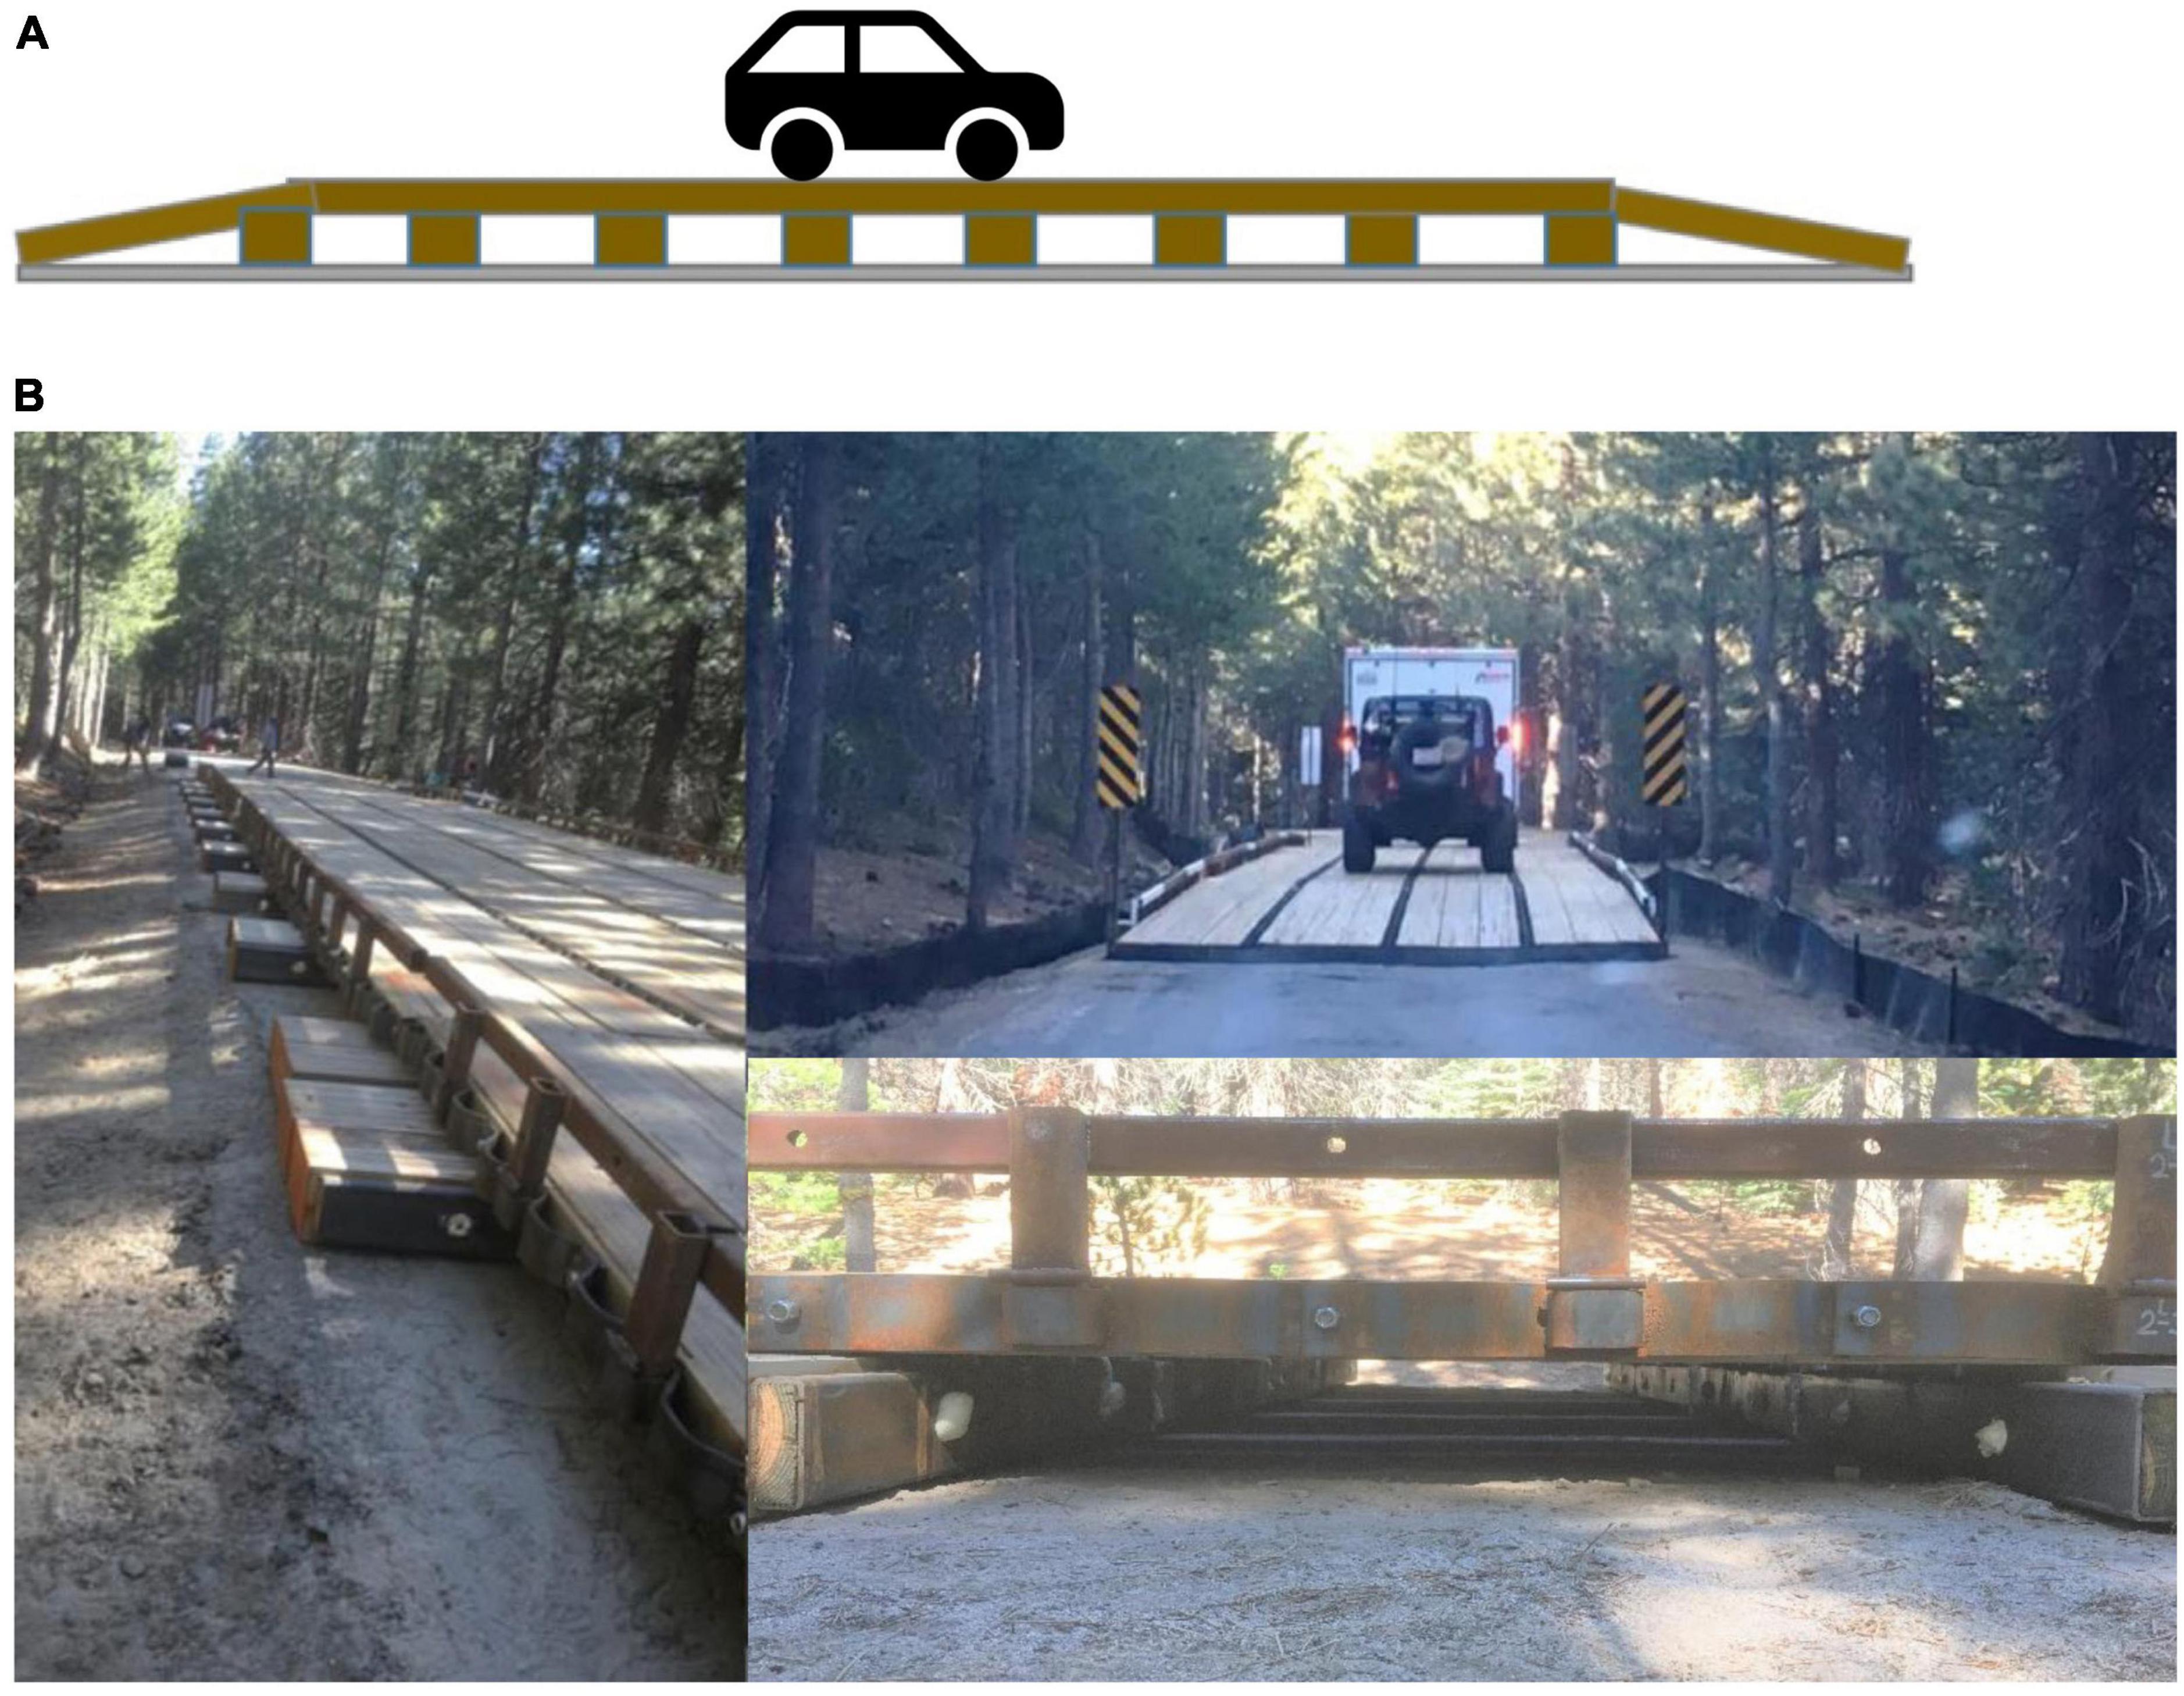 Vehicles travel over elevated road segment in Sierra National Forest, Fresno County, CA, USA.